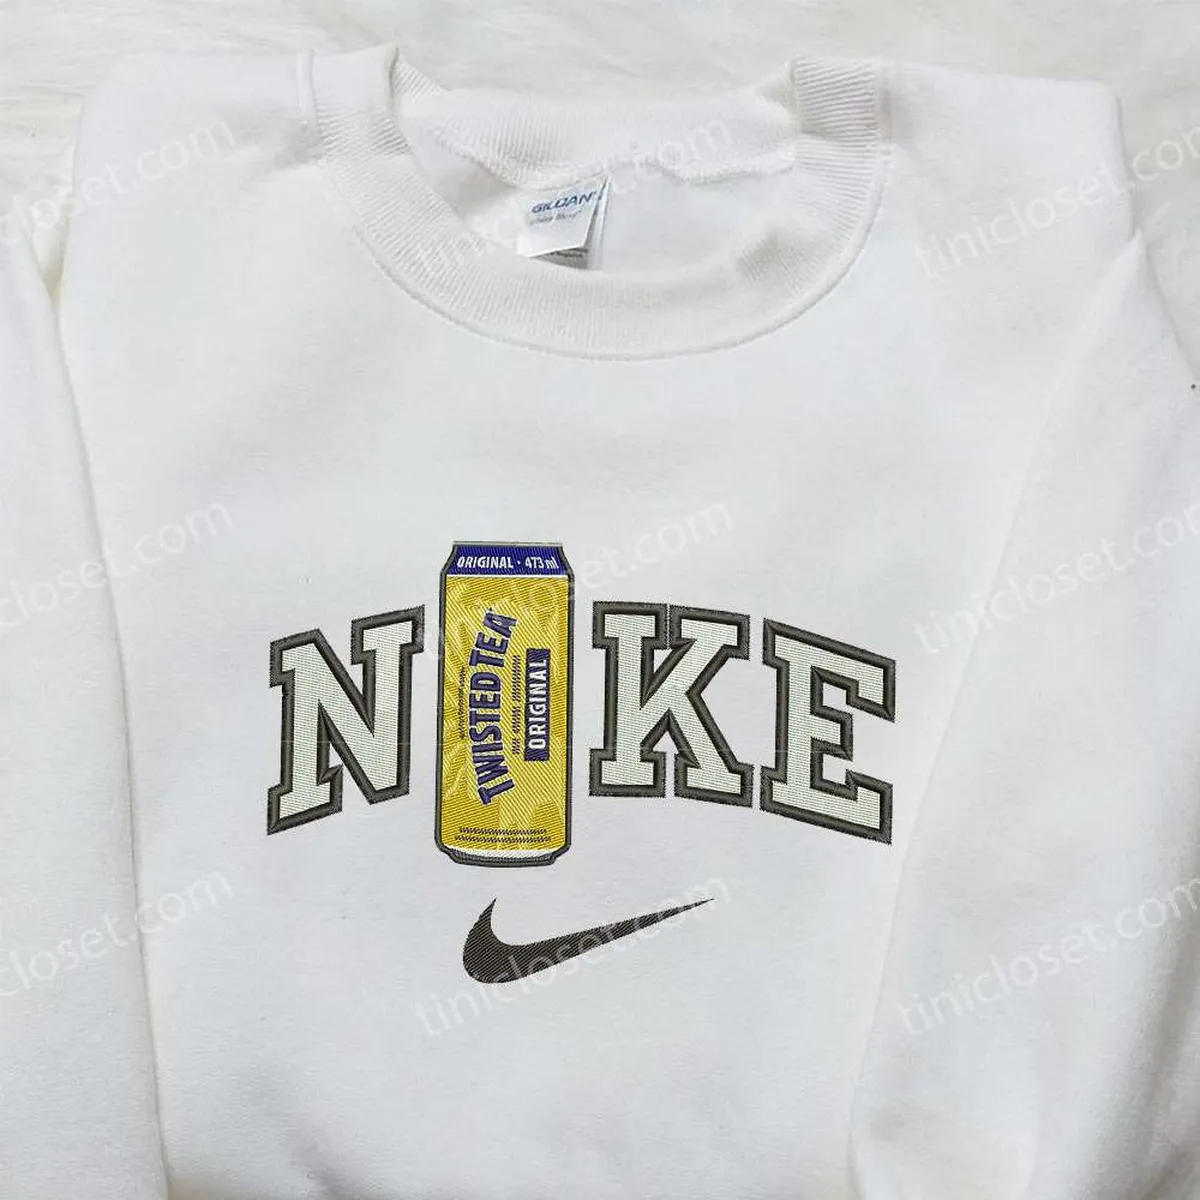 Twisted Tea Bottle x Nike Embroidered Hoodie, Favorite Food Embroidered Shirt, Nike Inspired Embroidered Shirt